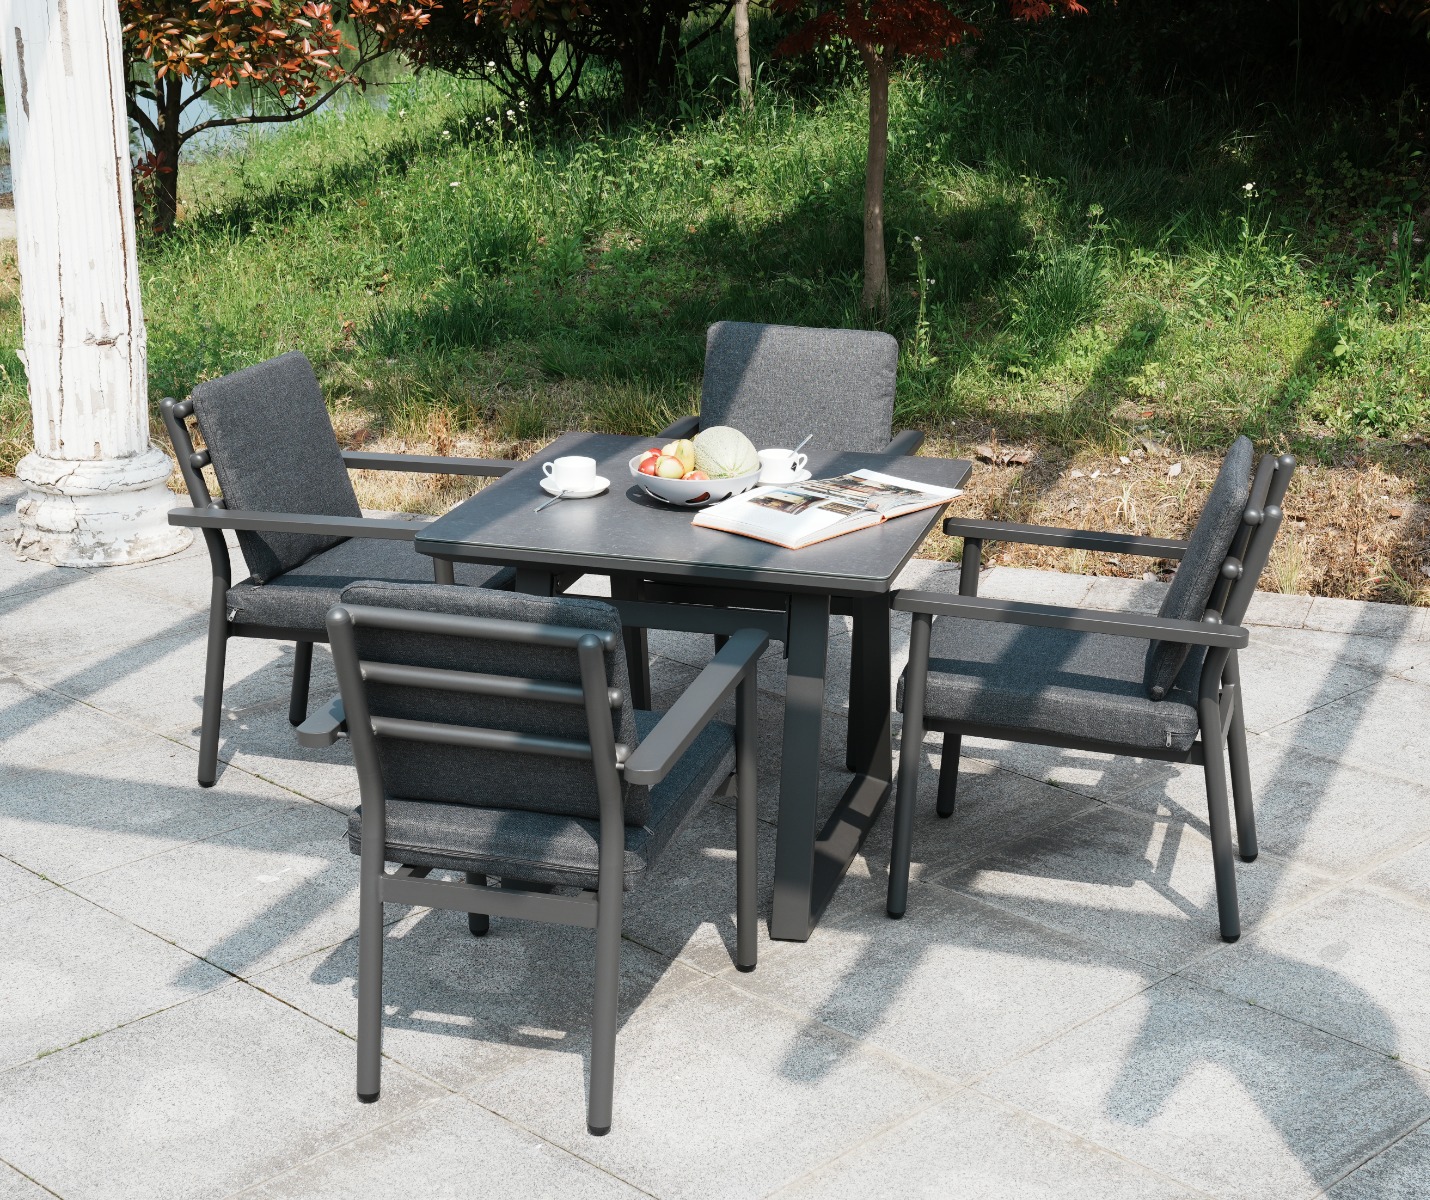 Deluxe Aluminium 4 Seat Dining Set with Grey Table Top